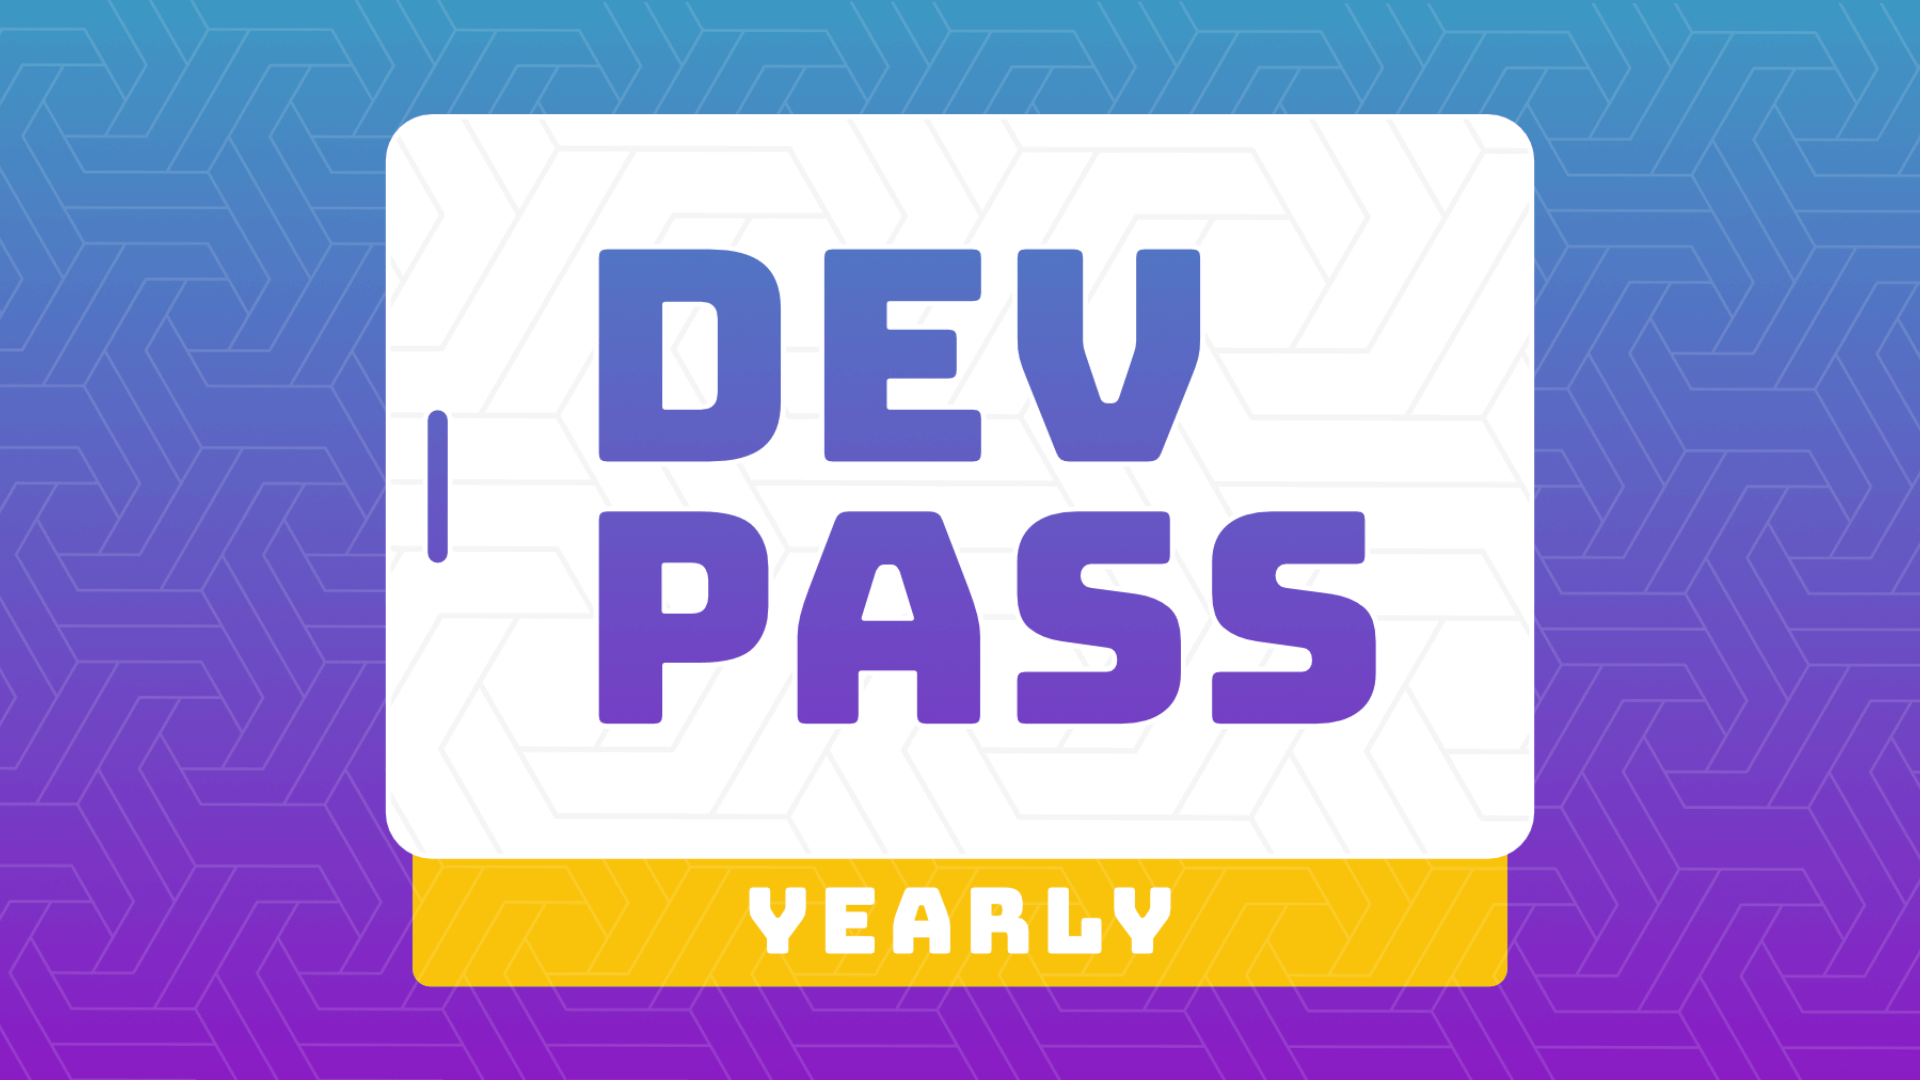 DevPass Yearly Subscription Overview Card Image